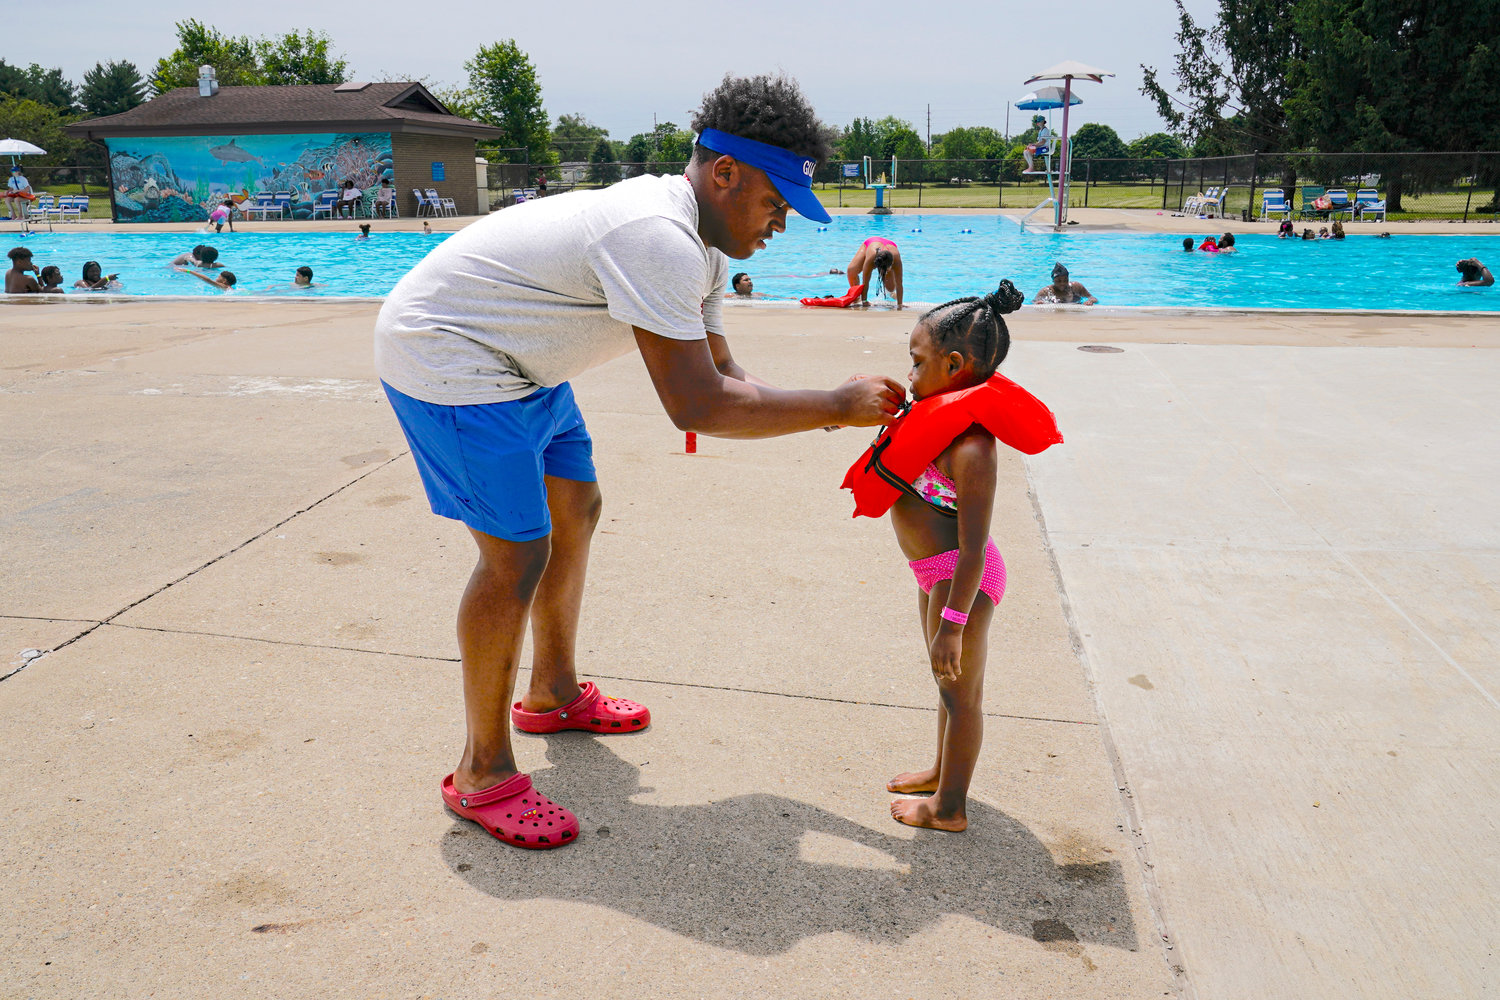 Lifeguard Donald Harris, 17, helps a swimmer with her lifejacket at the Douglass Park pool in Indianapolis, Friday, June 17, 2022. Indianapolis typically fills 17 pools each year, but with a national lifeguard shortage exacerbated by the COVID-19 pandemic, just five are open this summer. The American Lifeguard Association estimates one-third of pools in the United States are impacted by the shortage. (AP Photo/Michael Conroy)